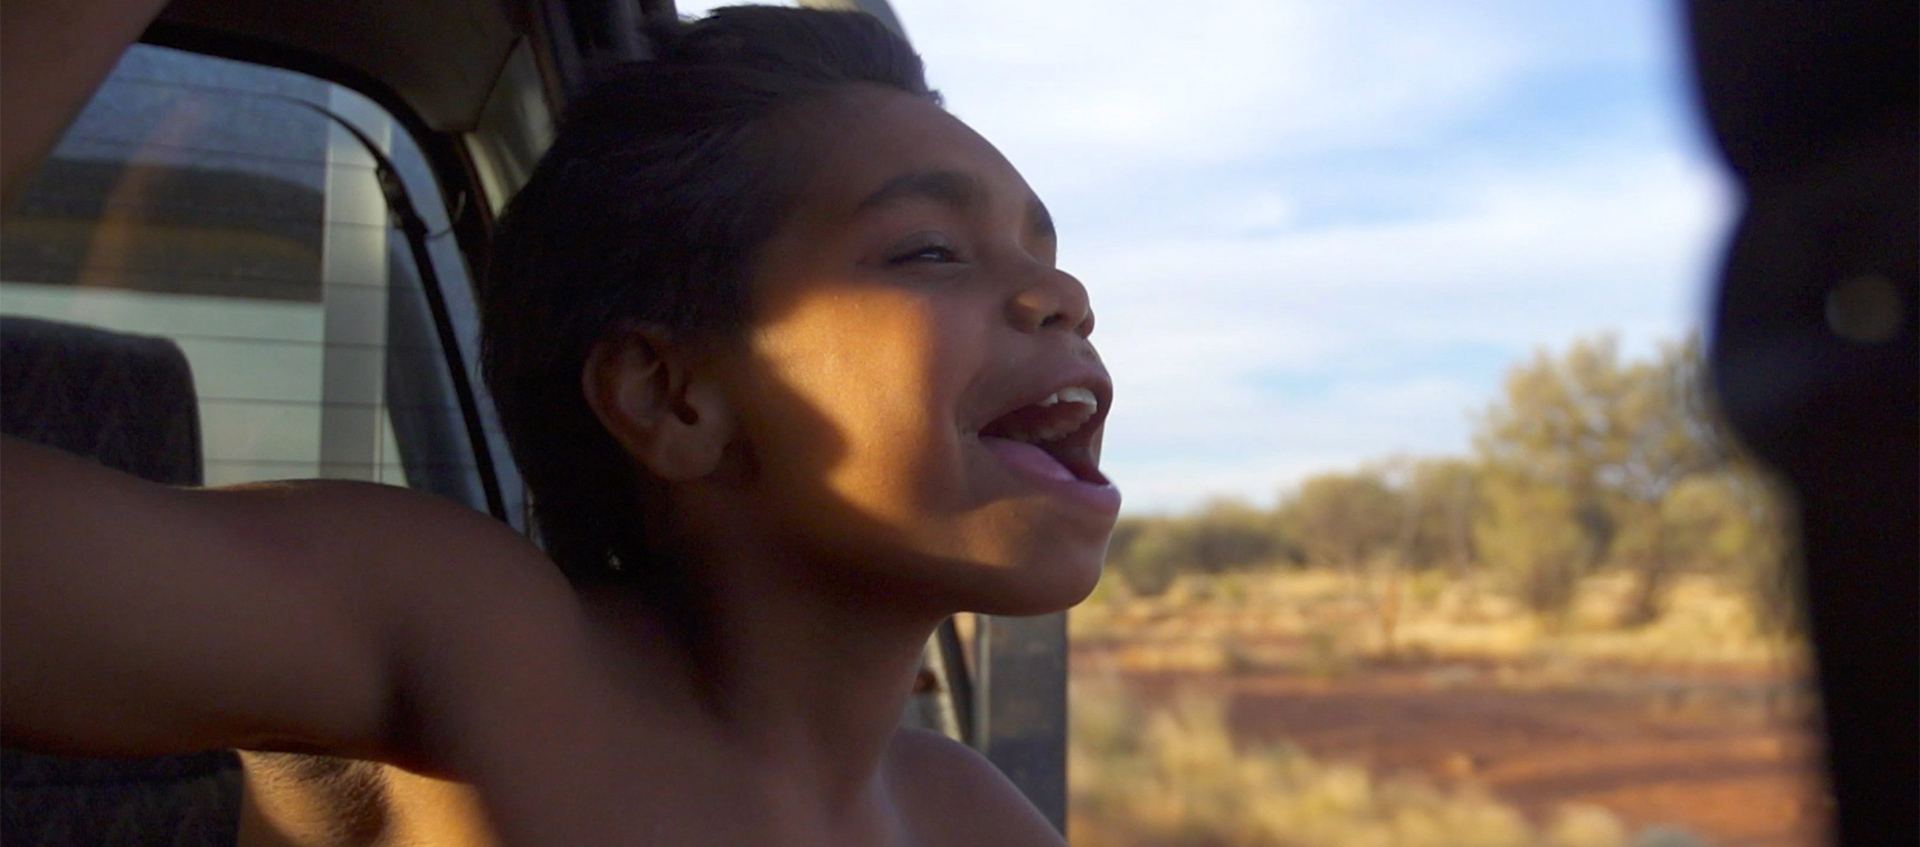 An aboriginal boy leans his head outside the window of a moving car